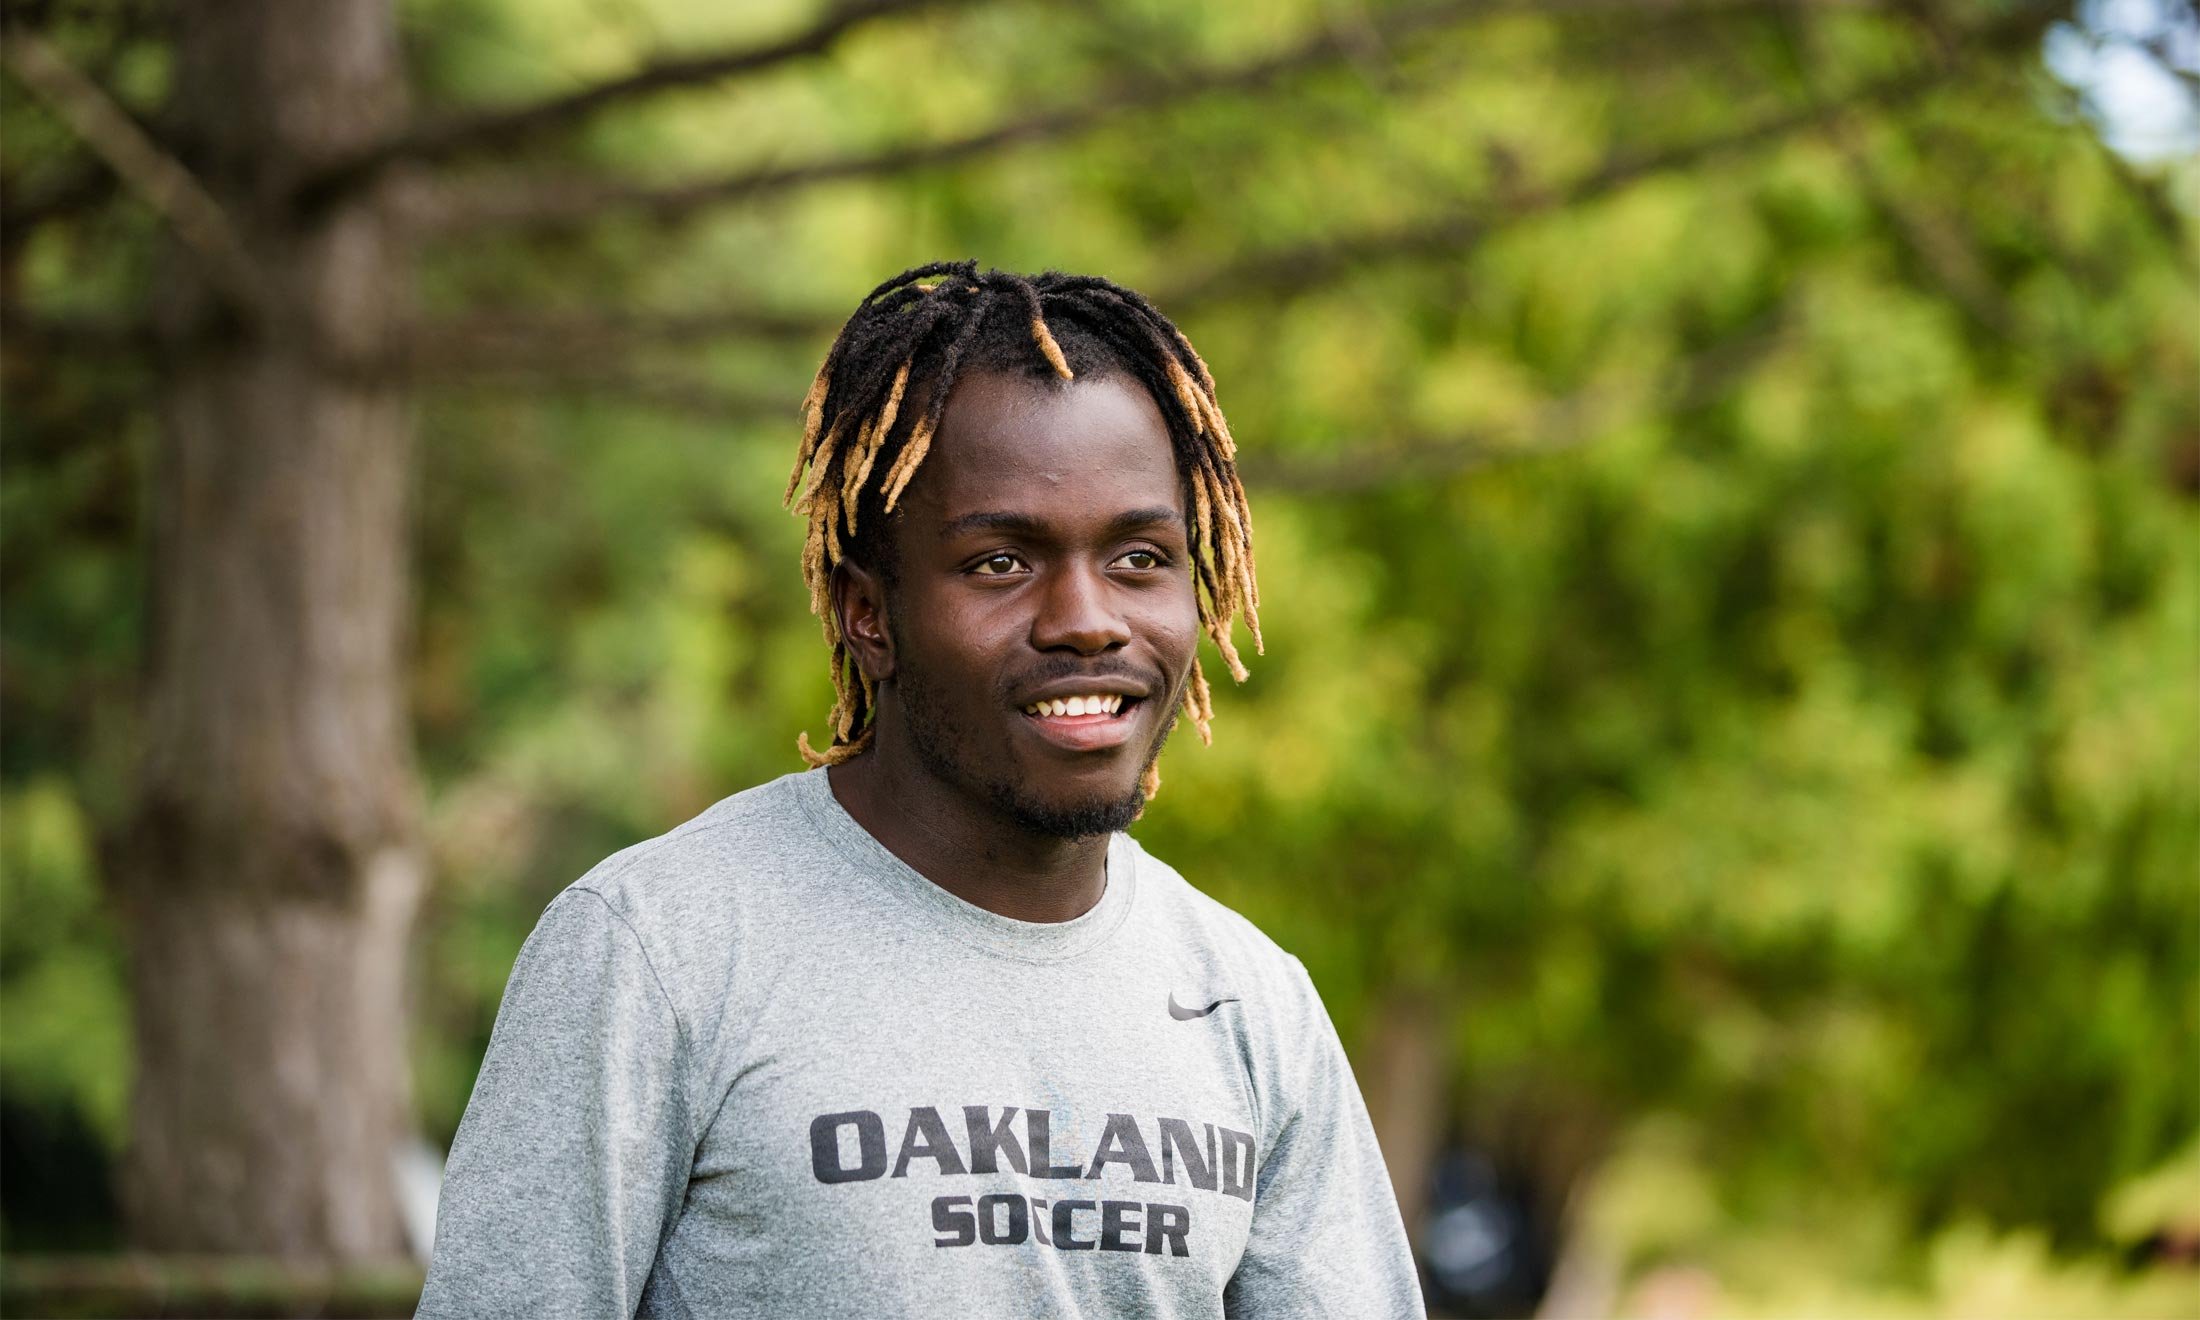 Oakland University soccer player Wilfred Williams smiles outside during practice in a gray Oakland University soccer shirt